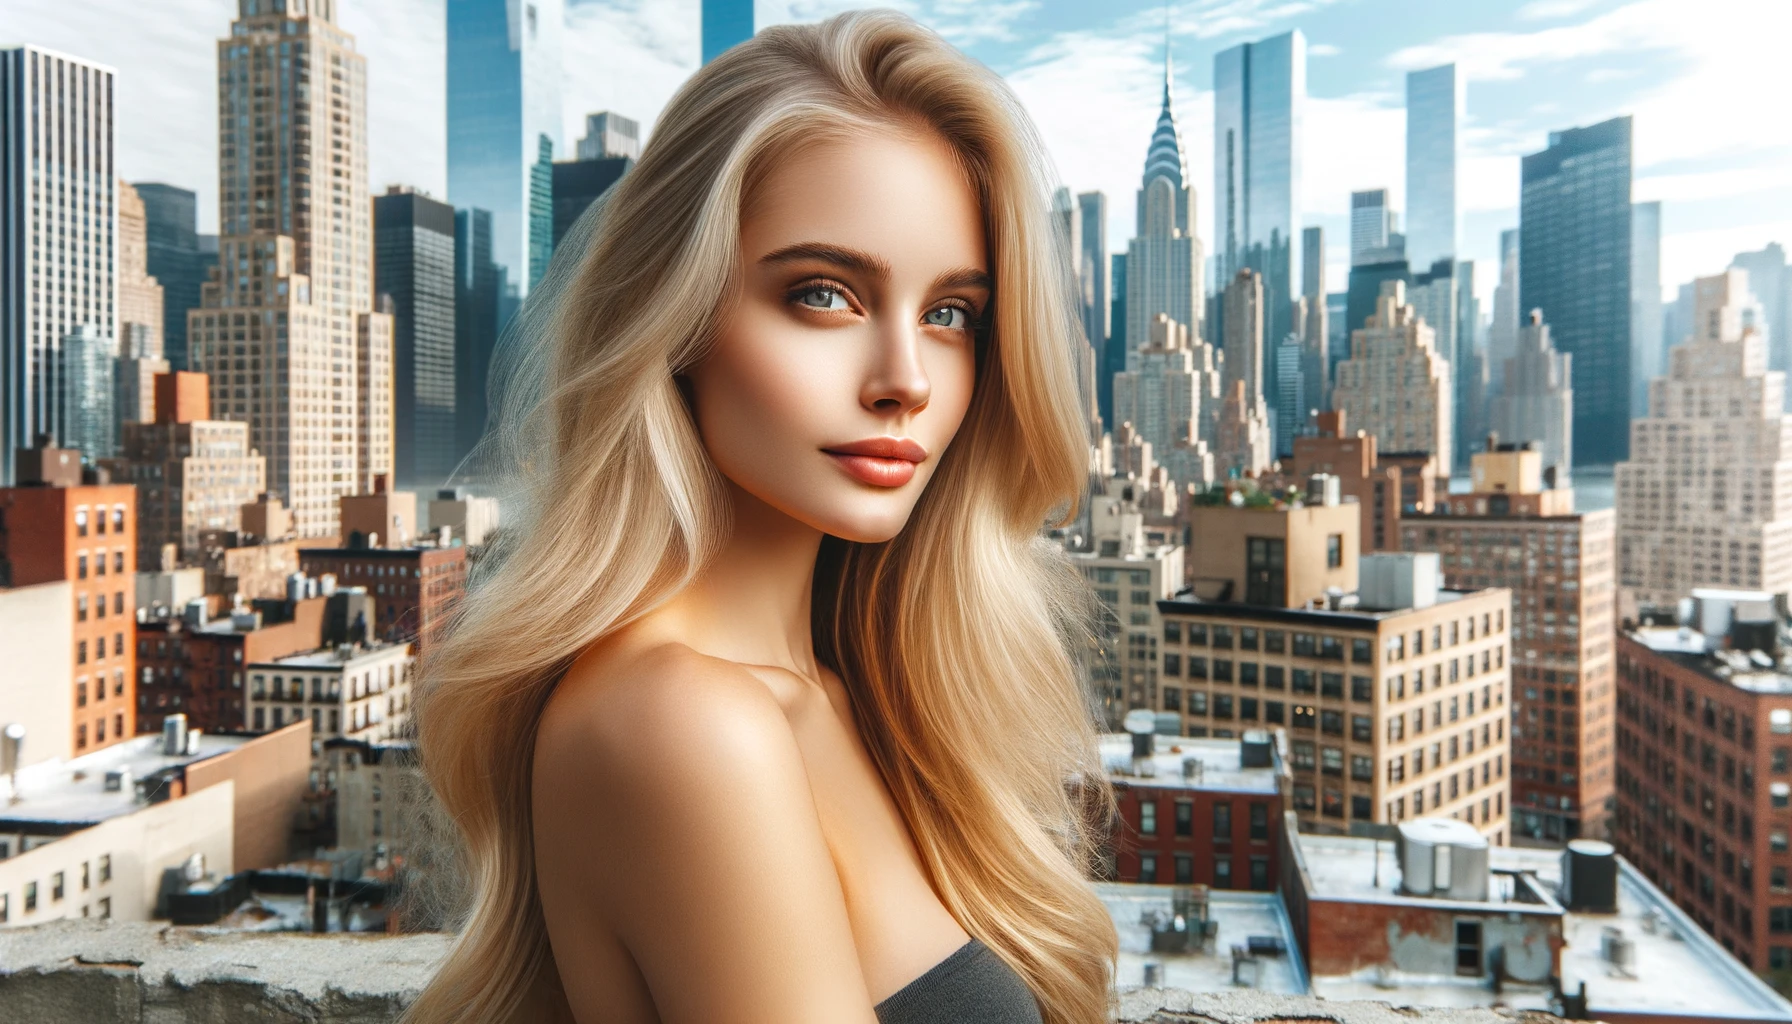 10 Collagen Disrupters Living in a Big City (NYC)